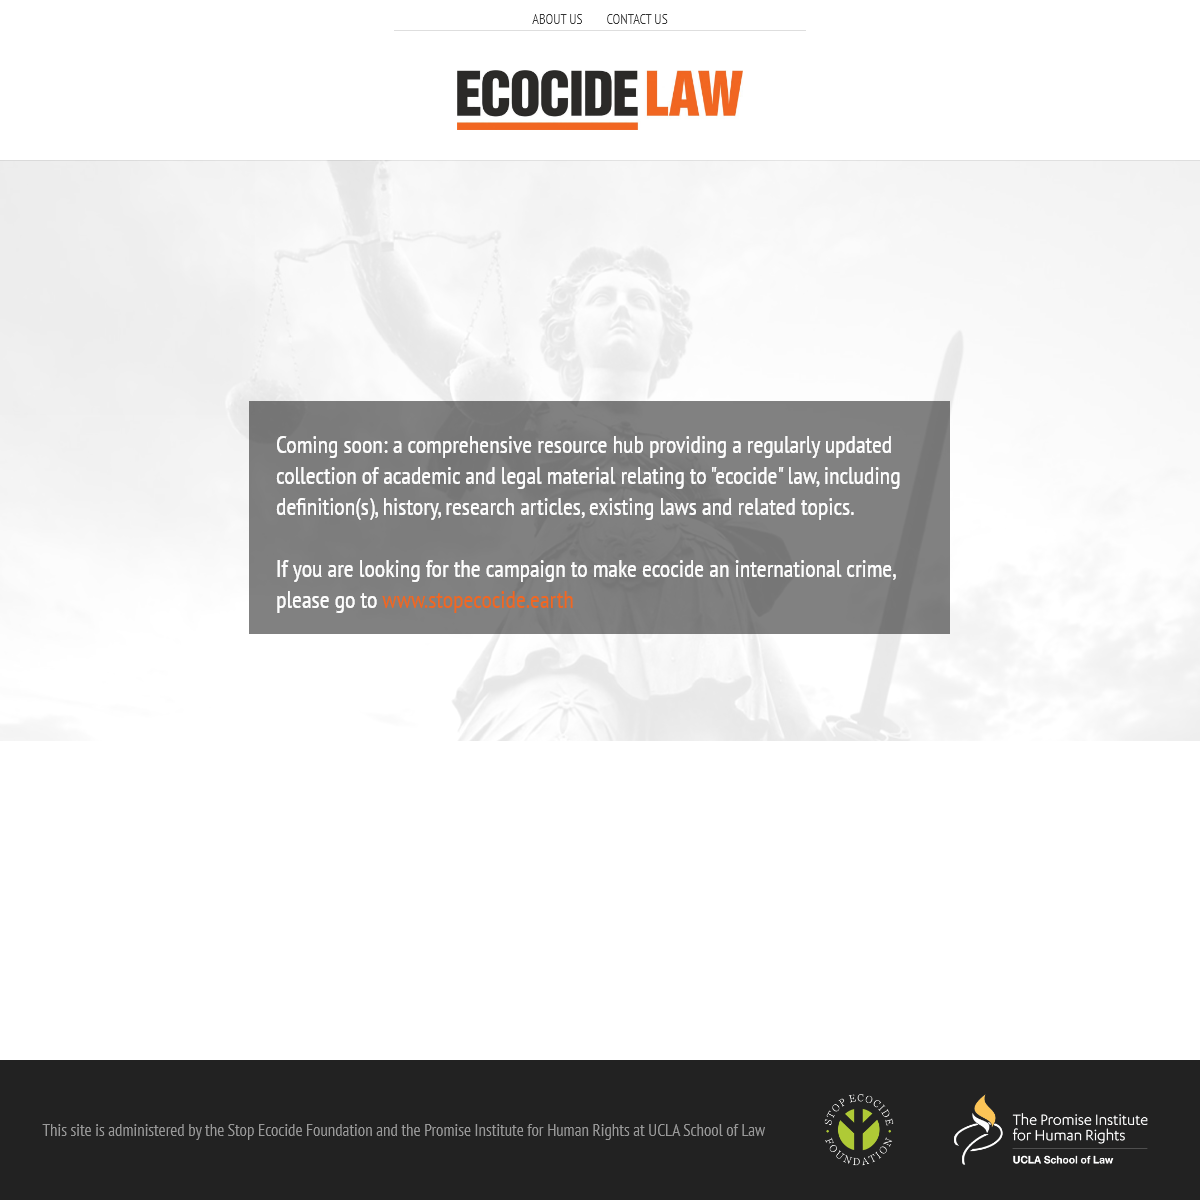 A complete backup of ecocidelaw.com